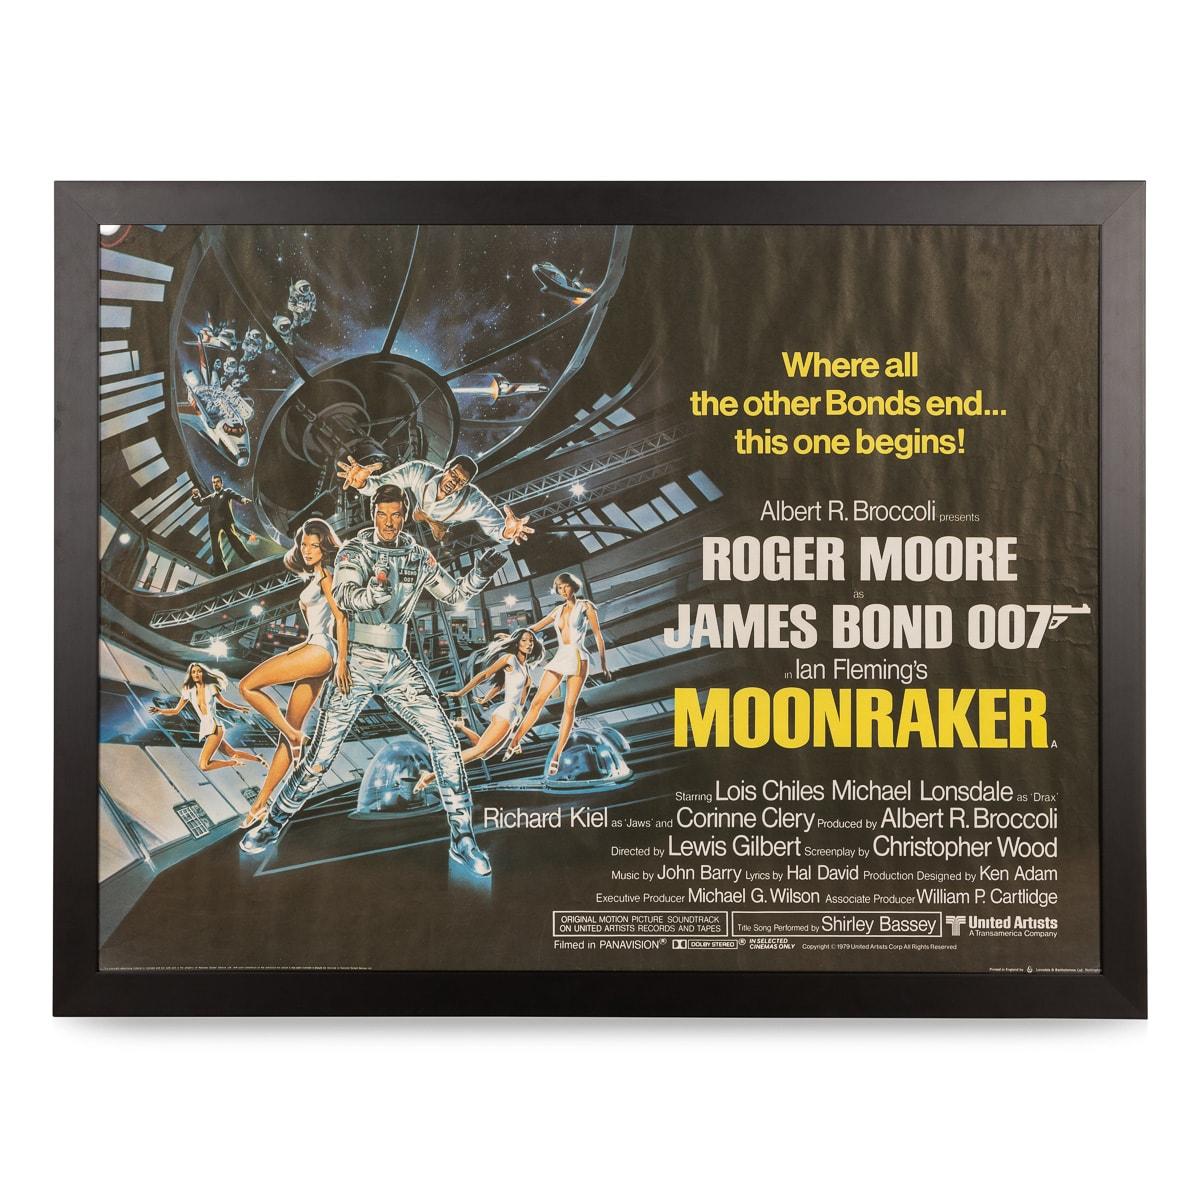 A very rare and original British (UK) release quad poster from the blockbuster Moonraker (1979), signed by Roger Moore. This was the eleventh in the James Bond series produced by Eon Productions, and the fourth to star Roger Moore as James Bond. The